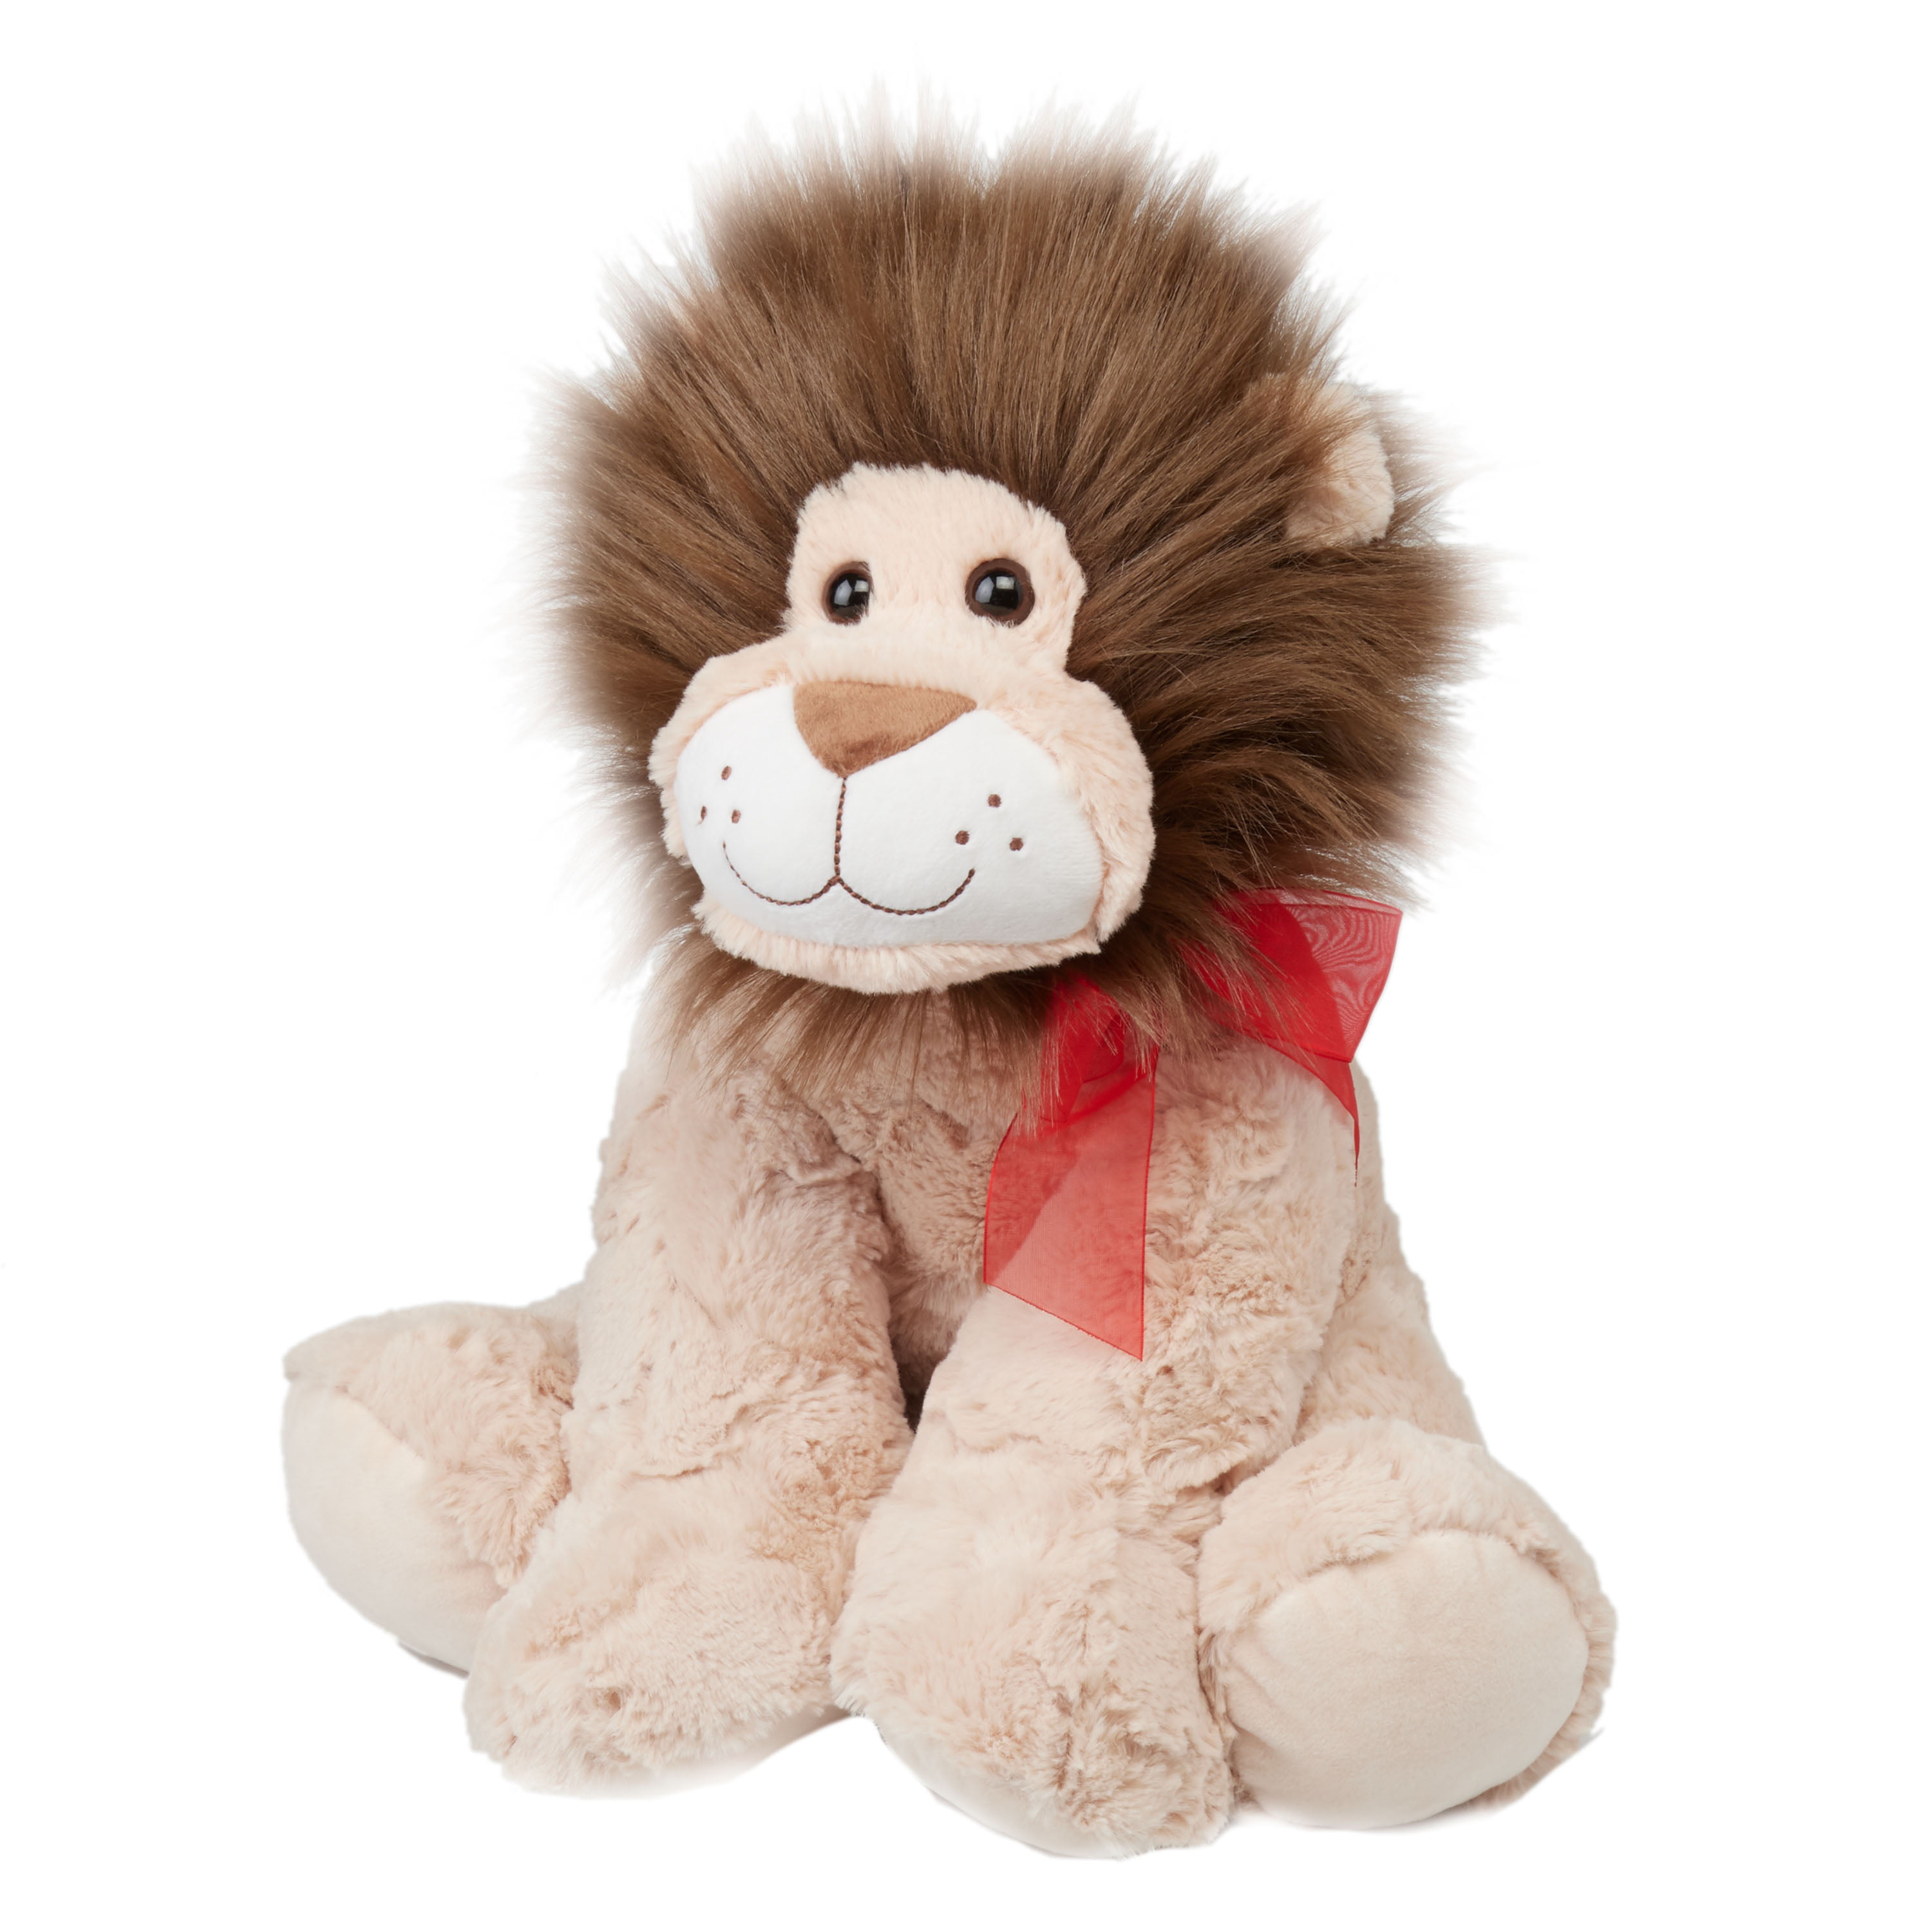 Adorable Plush Lion Cub from Fiesta Stuffed Toy King of Jungle 1996 8.5" 